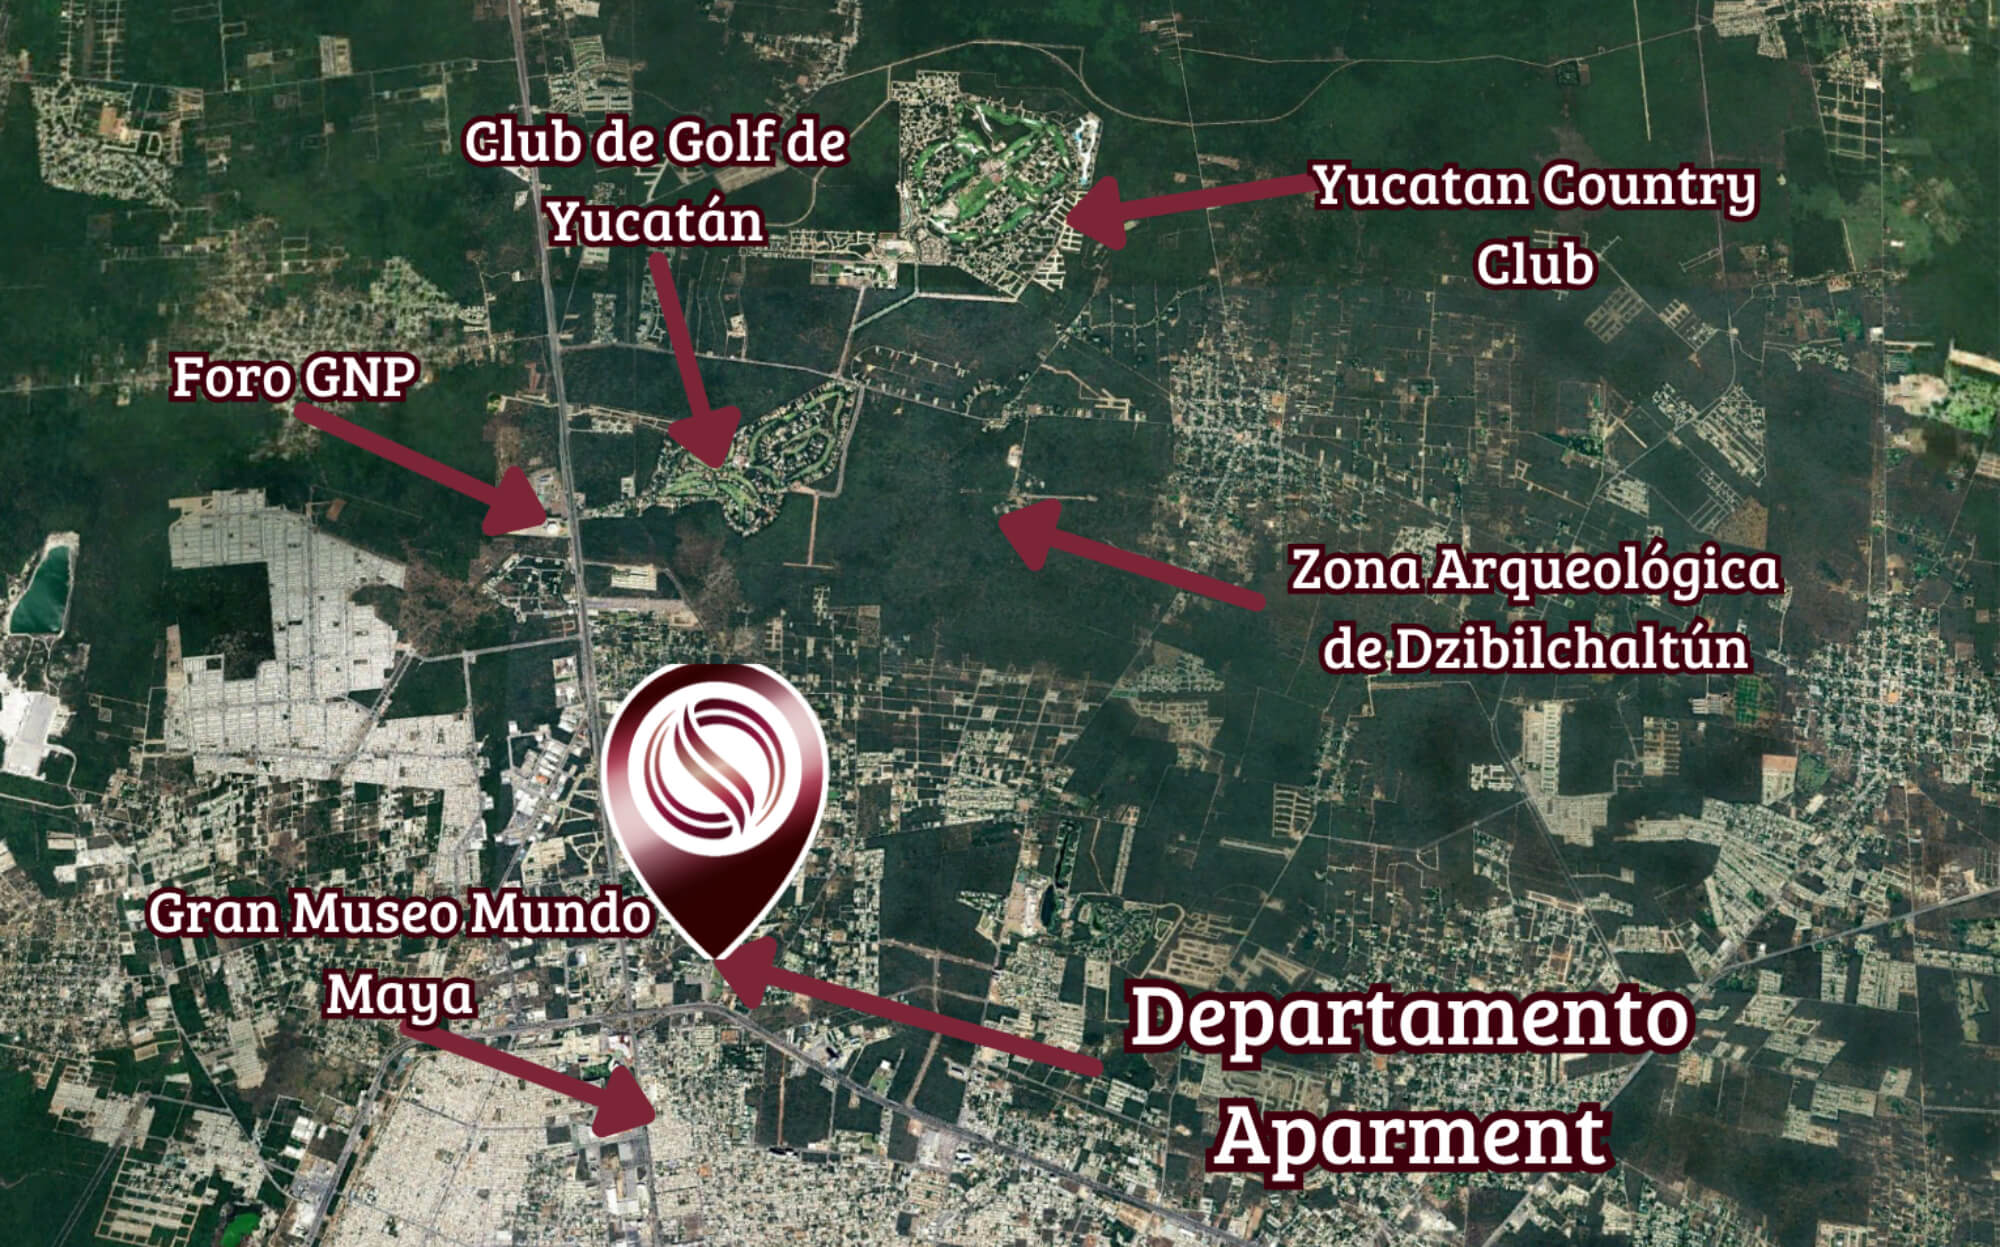 Condo with beach club, access to the ocean, green areas and amenities, pre-construction for sale Chicxulub Yucatan